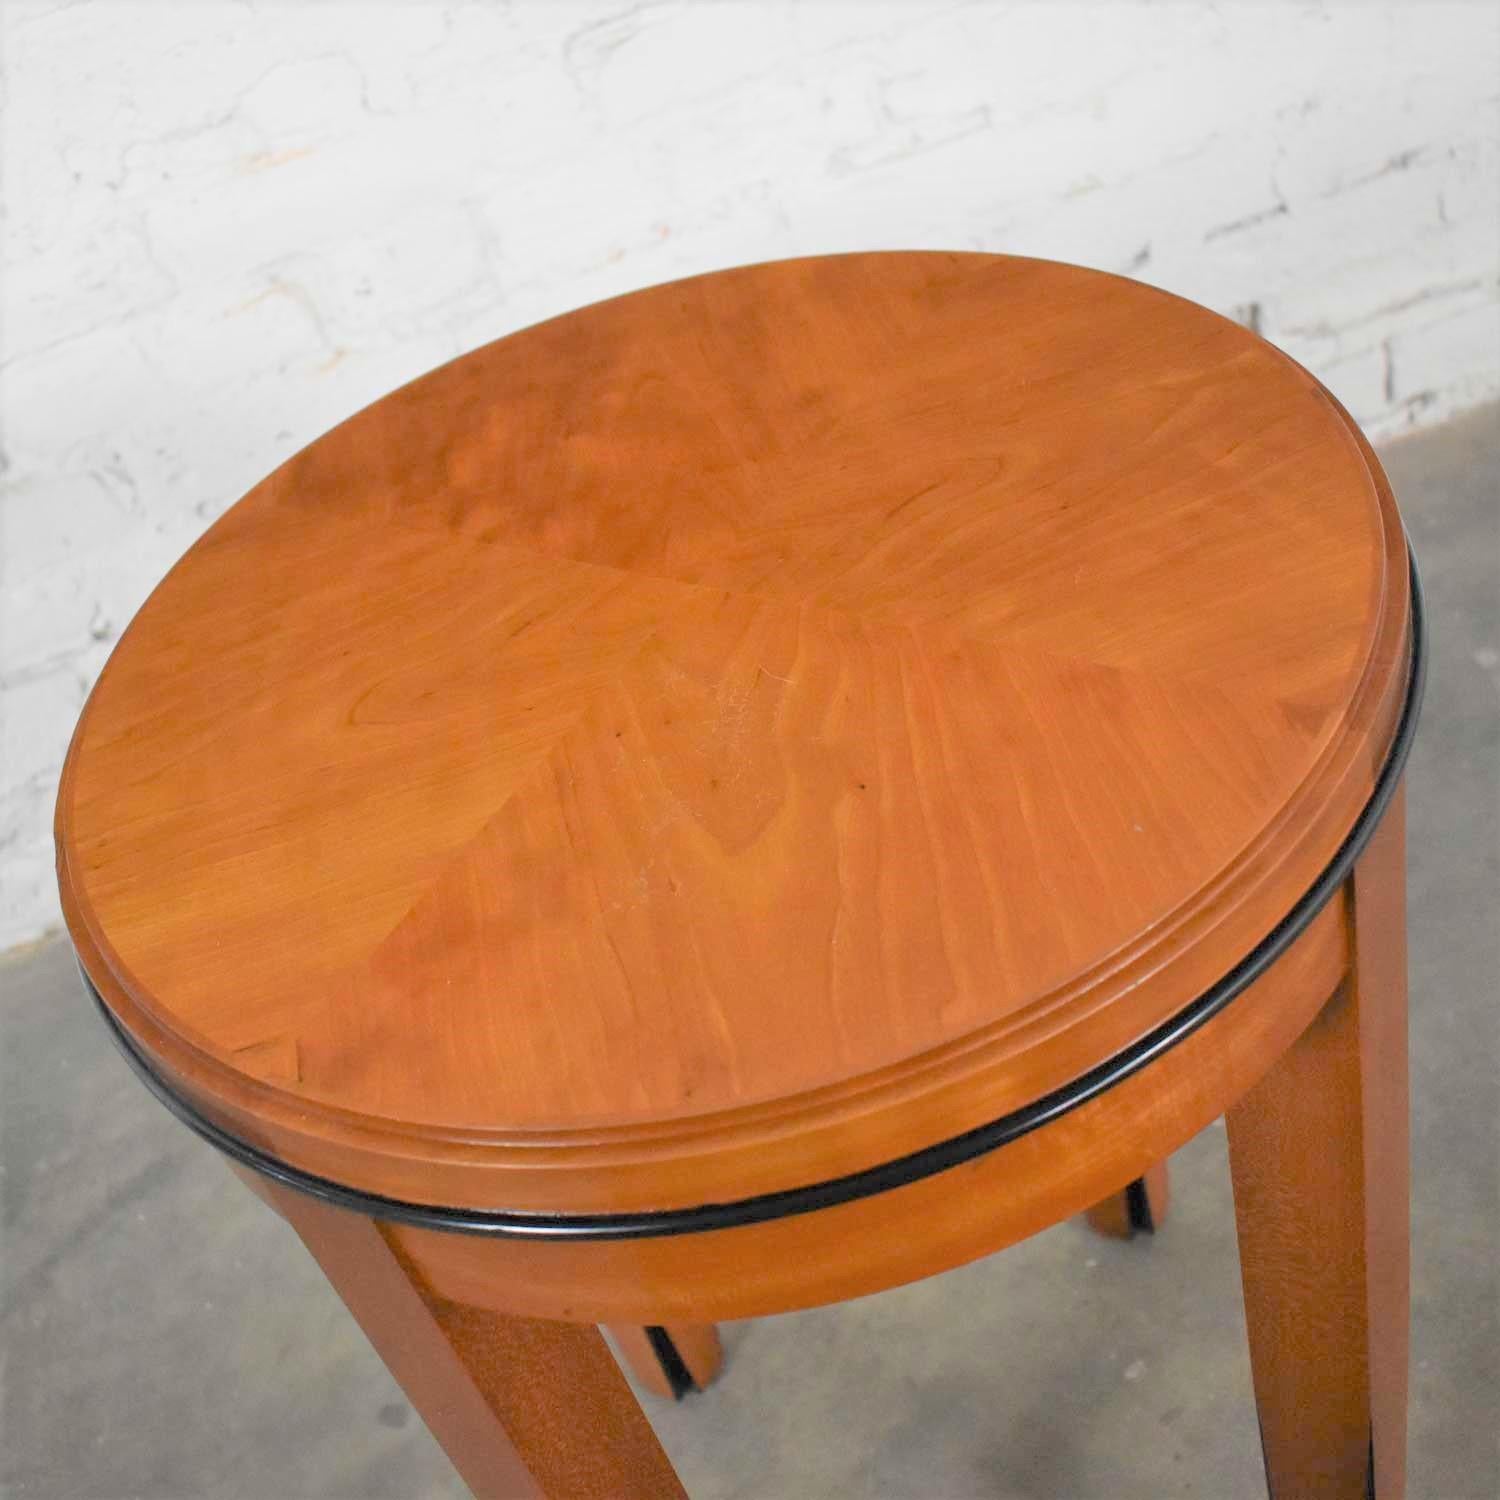 Small Round Art Deco Style Side Table or End Table by Hickory Business Furniture 1